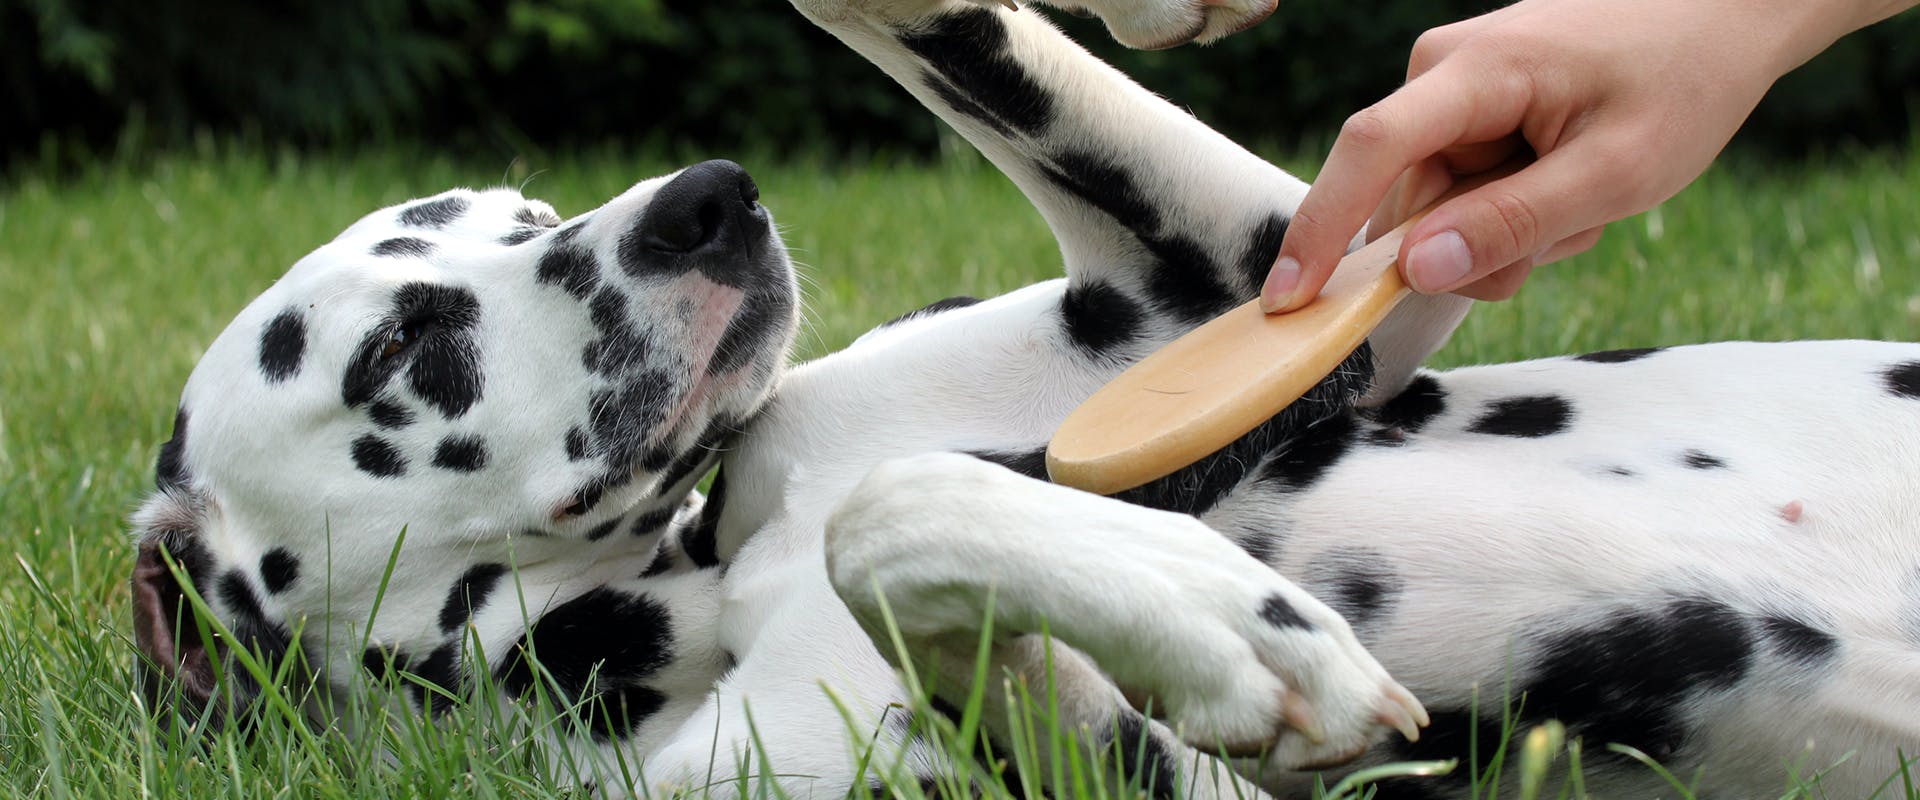 A Dalmatian dog lying in the grass, a hand holding a brush coming down to brush the dog